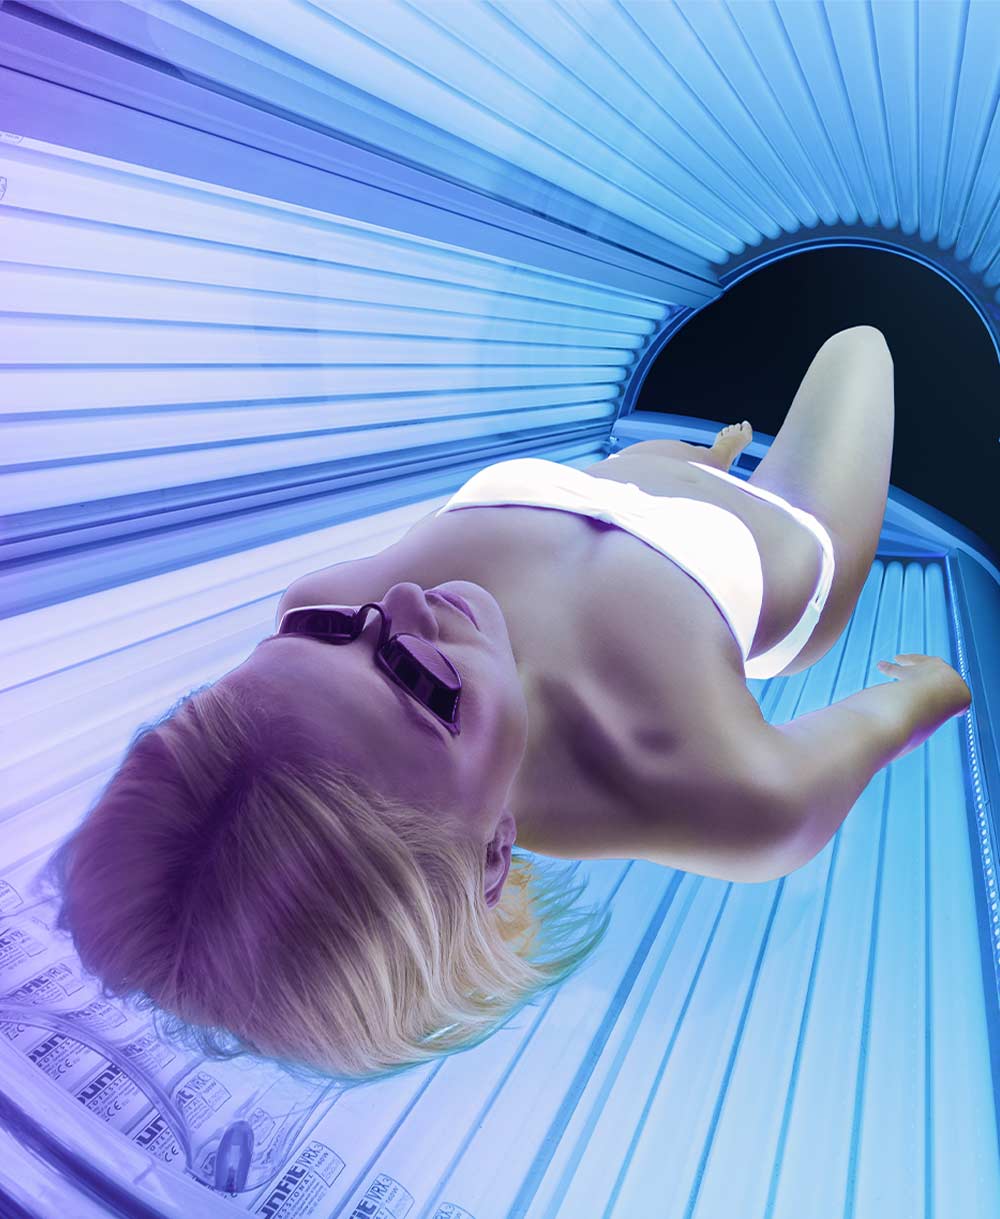 Woman tanning on sunbed